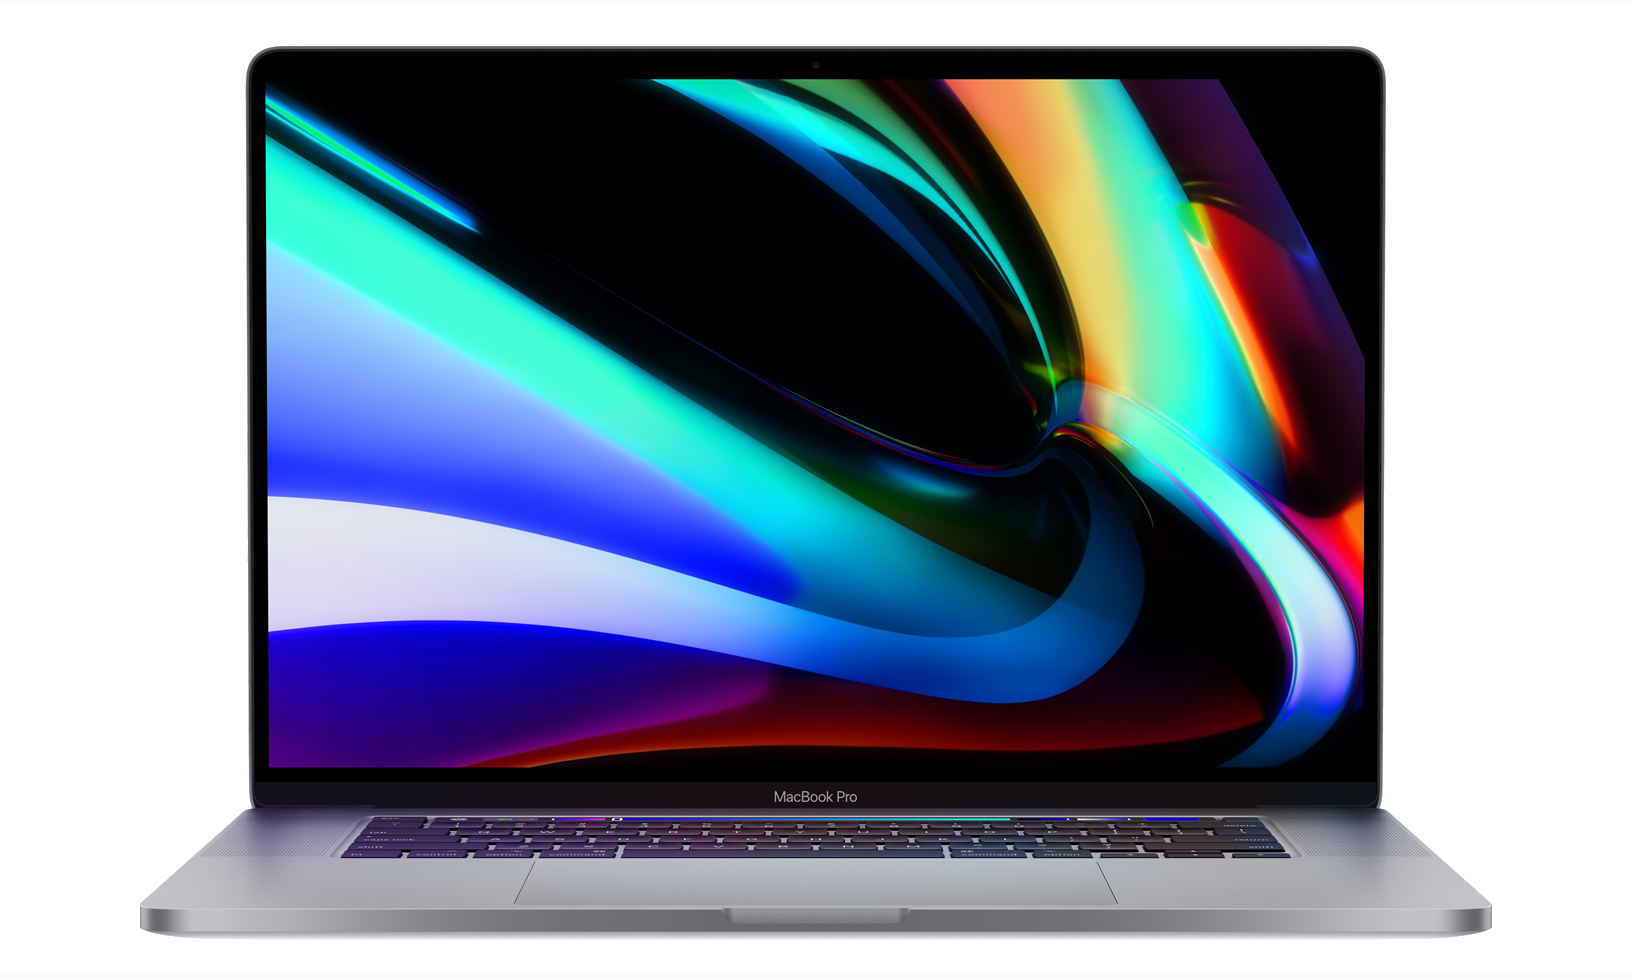 2021 MacBook Pro models to bring back MagSafe charging, no Touch bar, updated flat edge design: Rumour